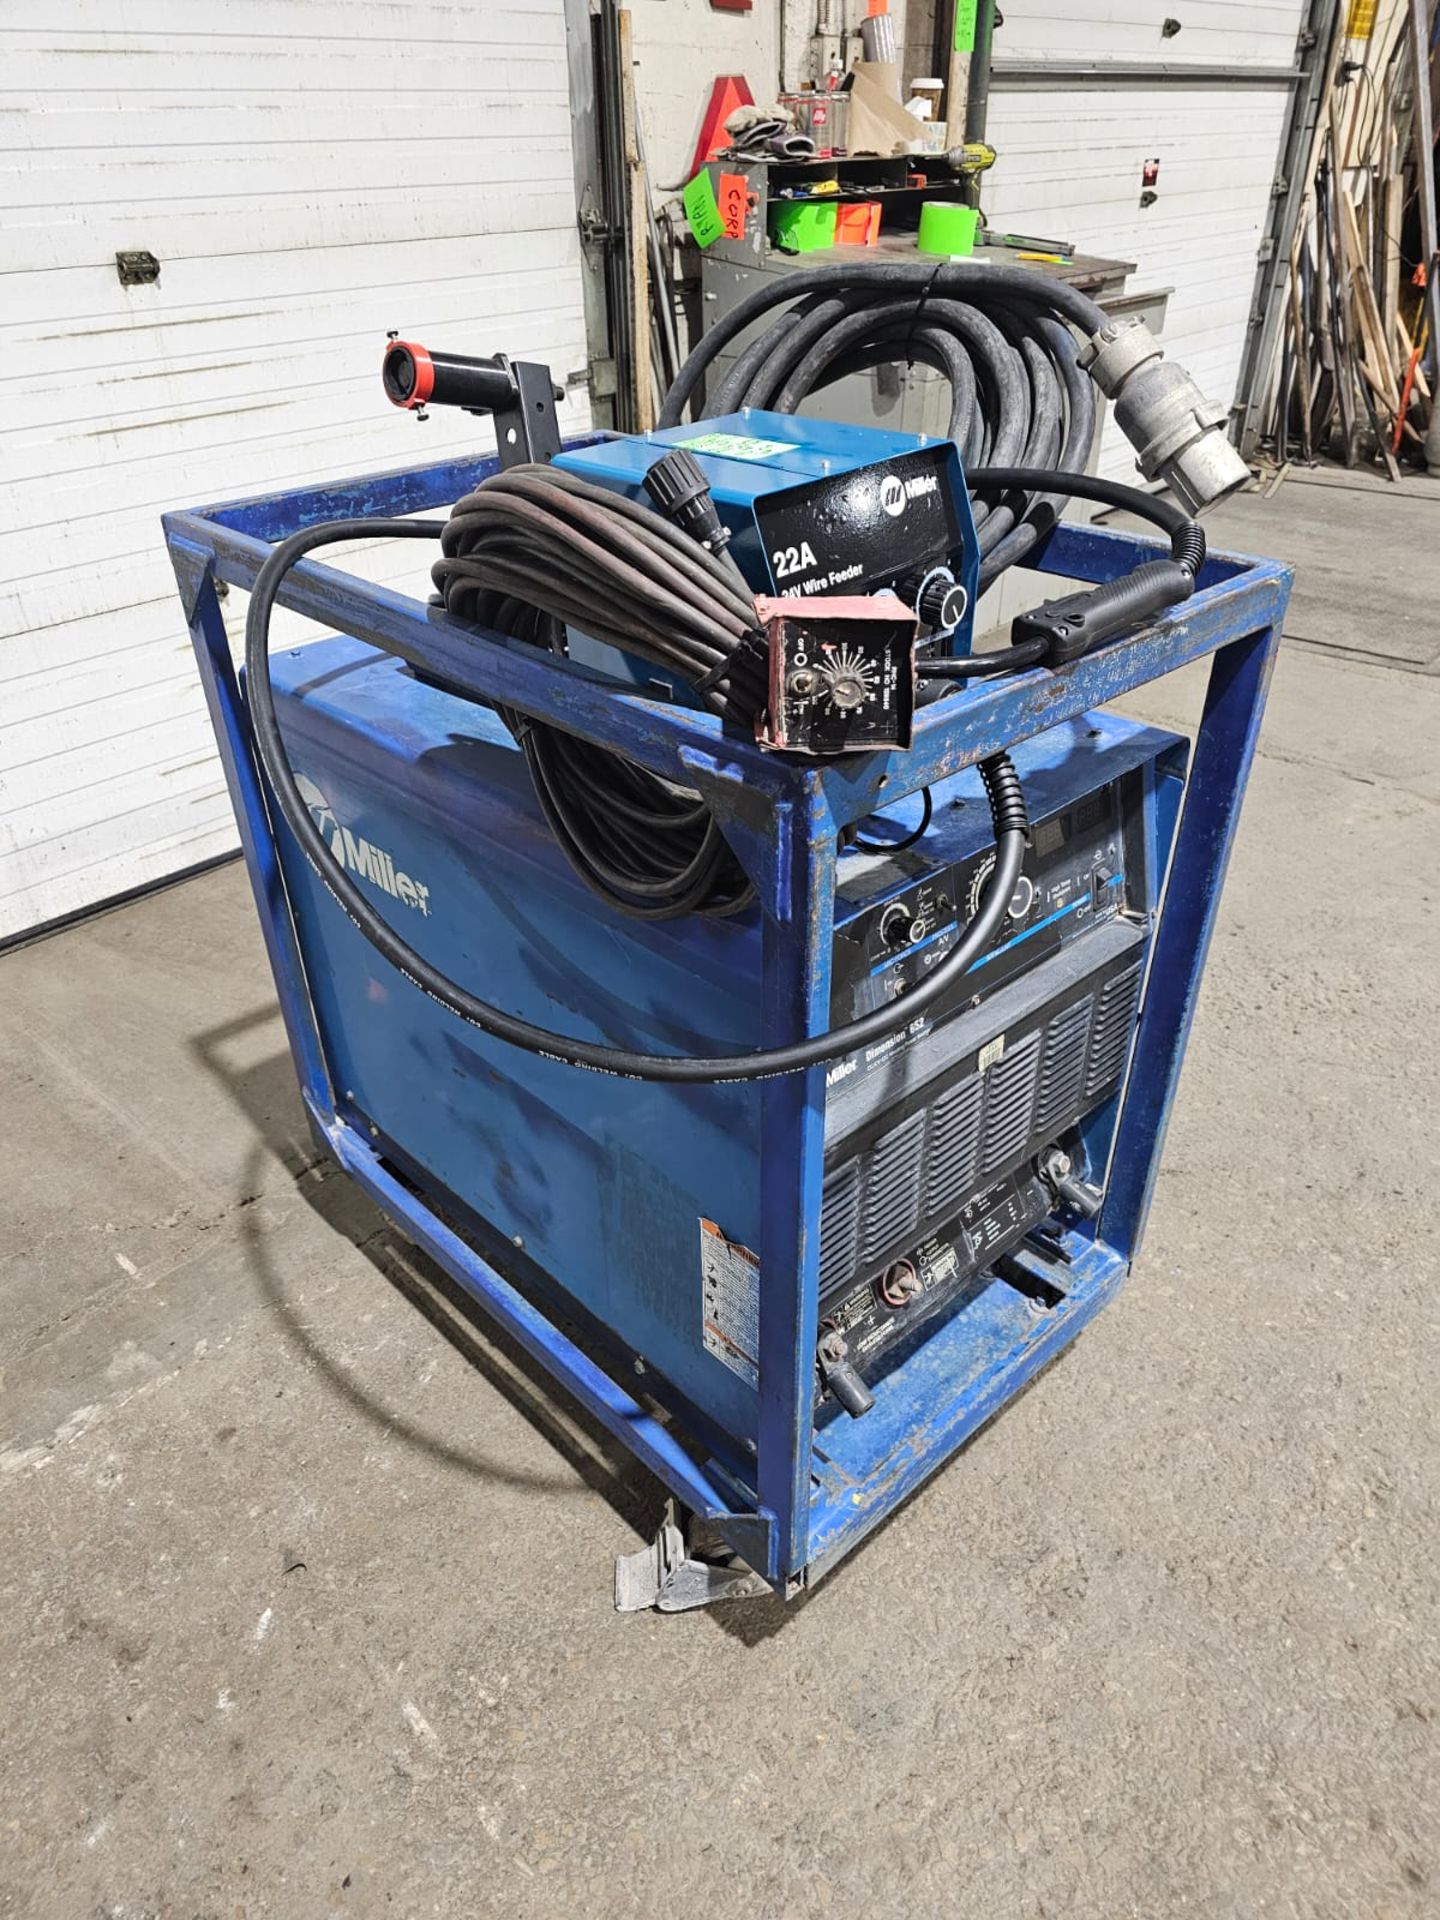 Miller Dimension 652 Mig Welder 650 Amp Mig Tig Stick Multi Process Power Source with 22A Wire - Image 5 of 7